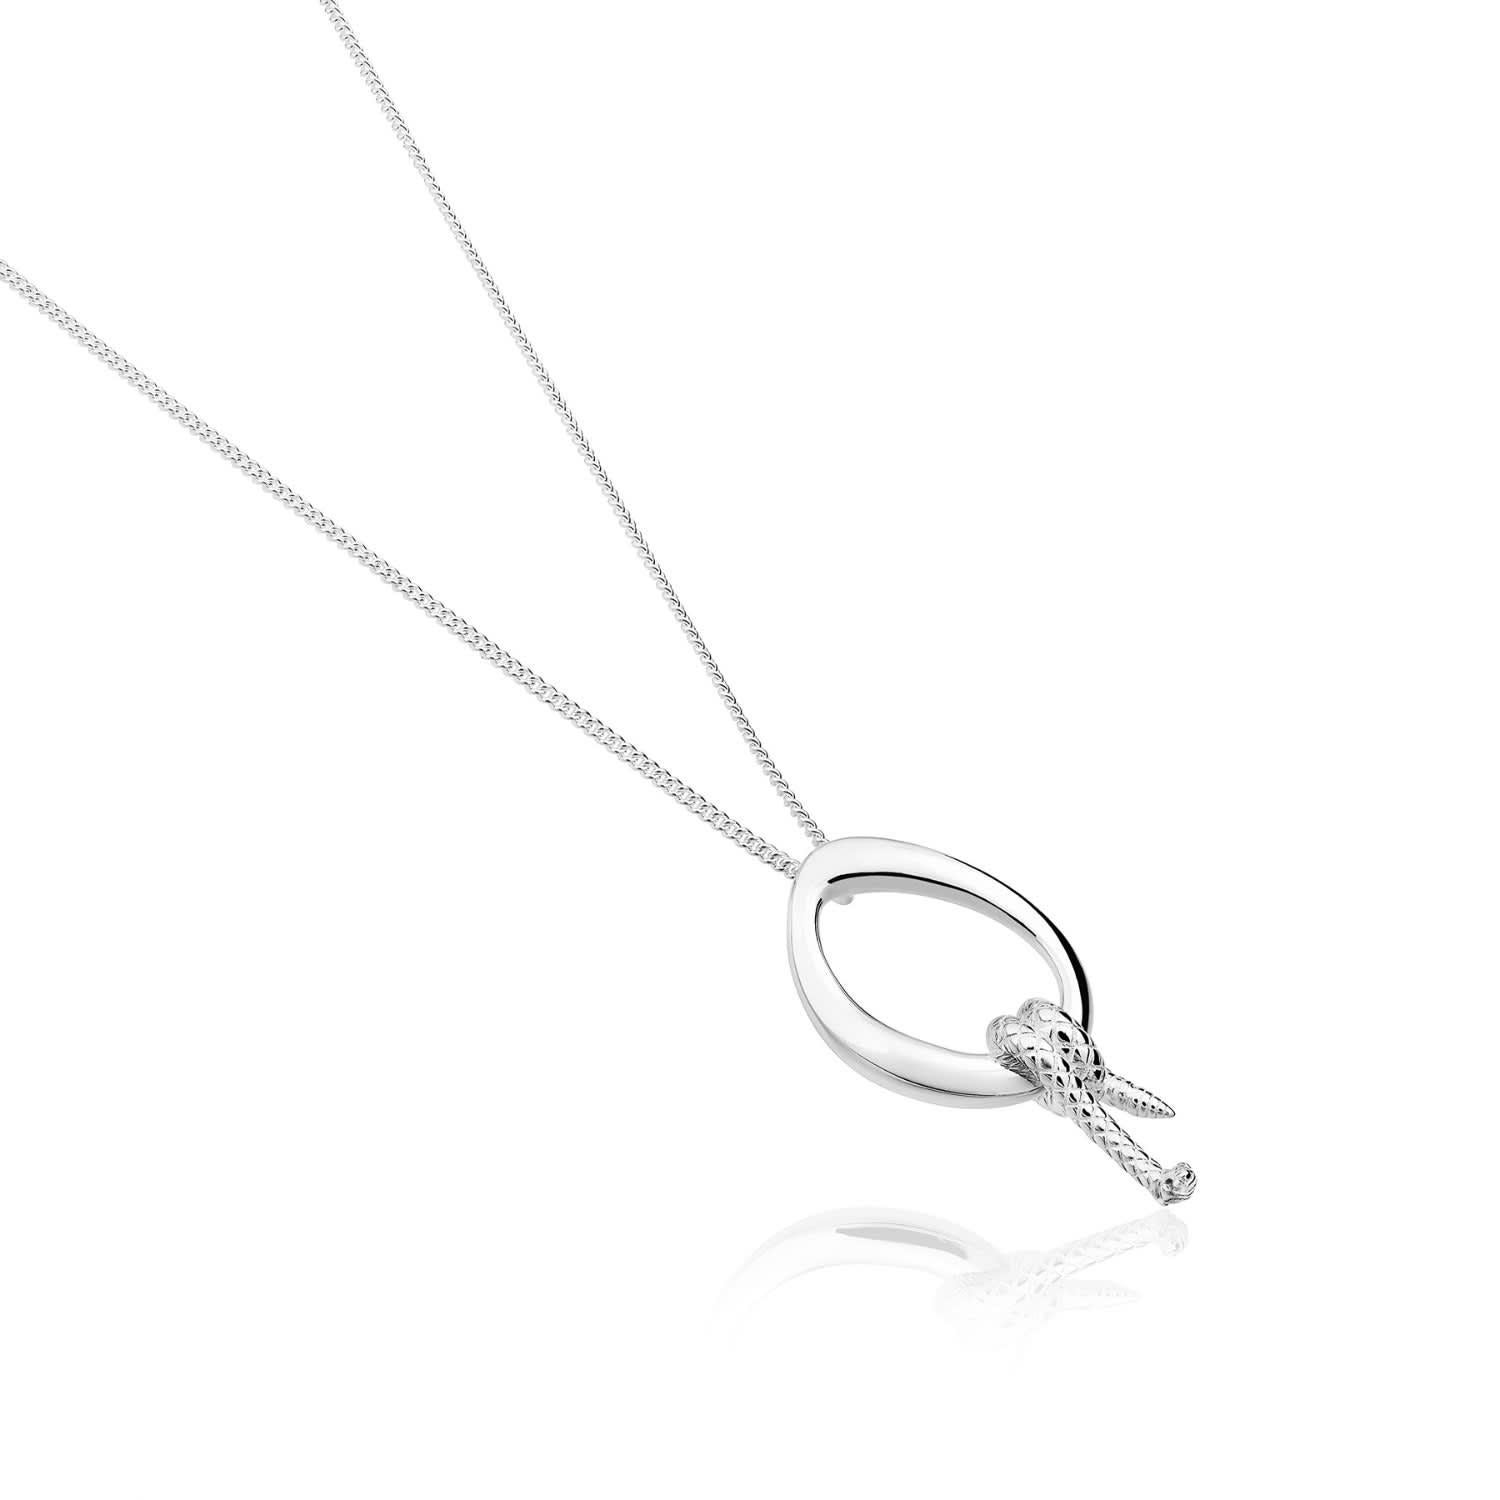 The Snake Small Pendant from the Animal´s Collection by TANE is made of .925 silver. Suspended from a 1.77¨ long chain with extension to 1.88¨, is an irregular link designed for the collection, inspired by nature. At the base of the link, a snake is